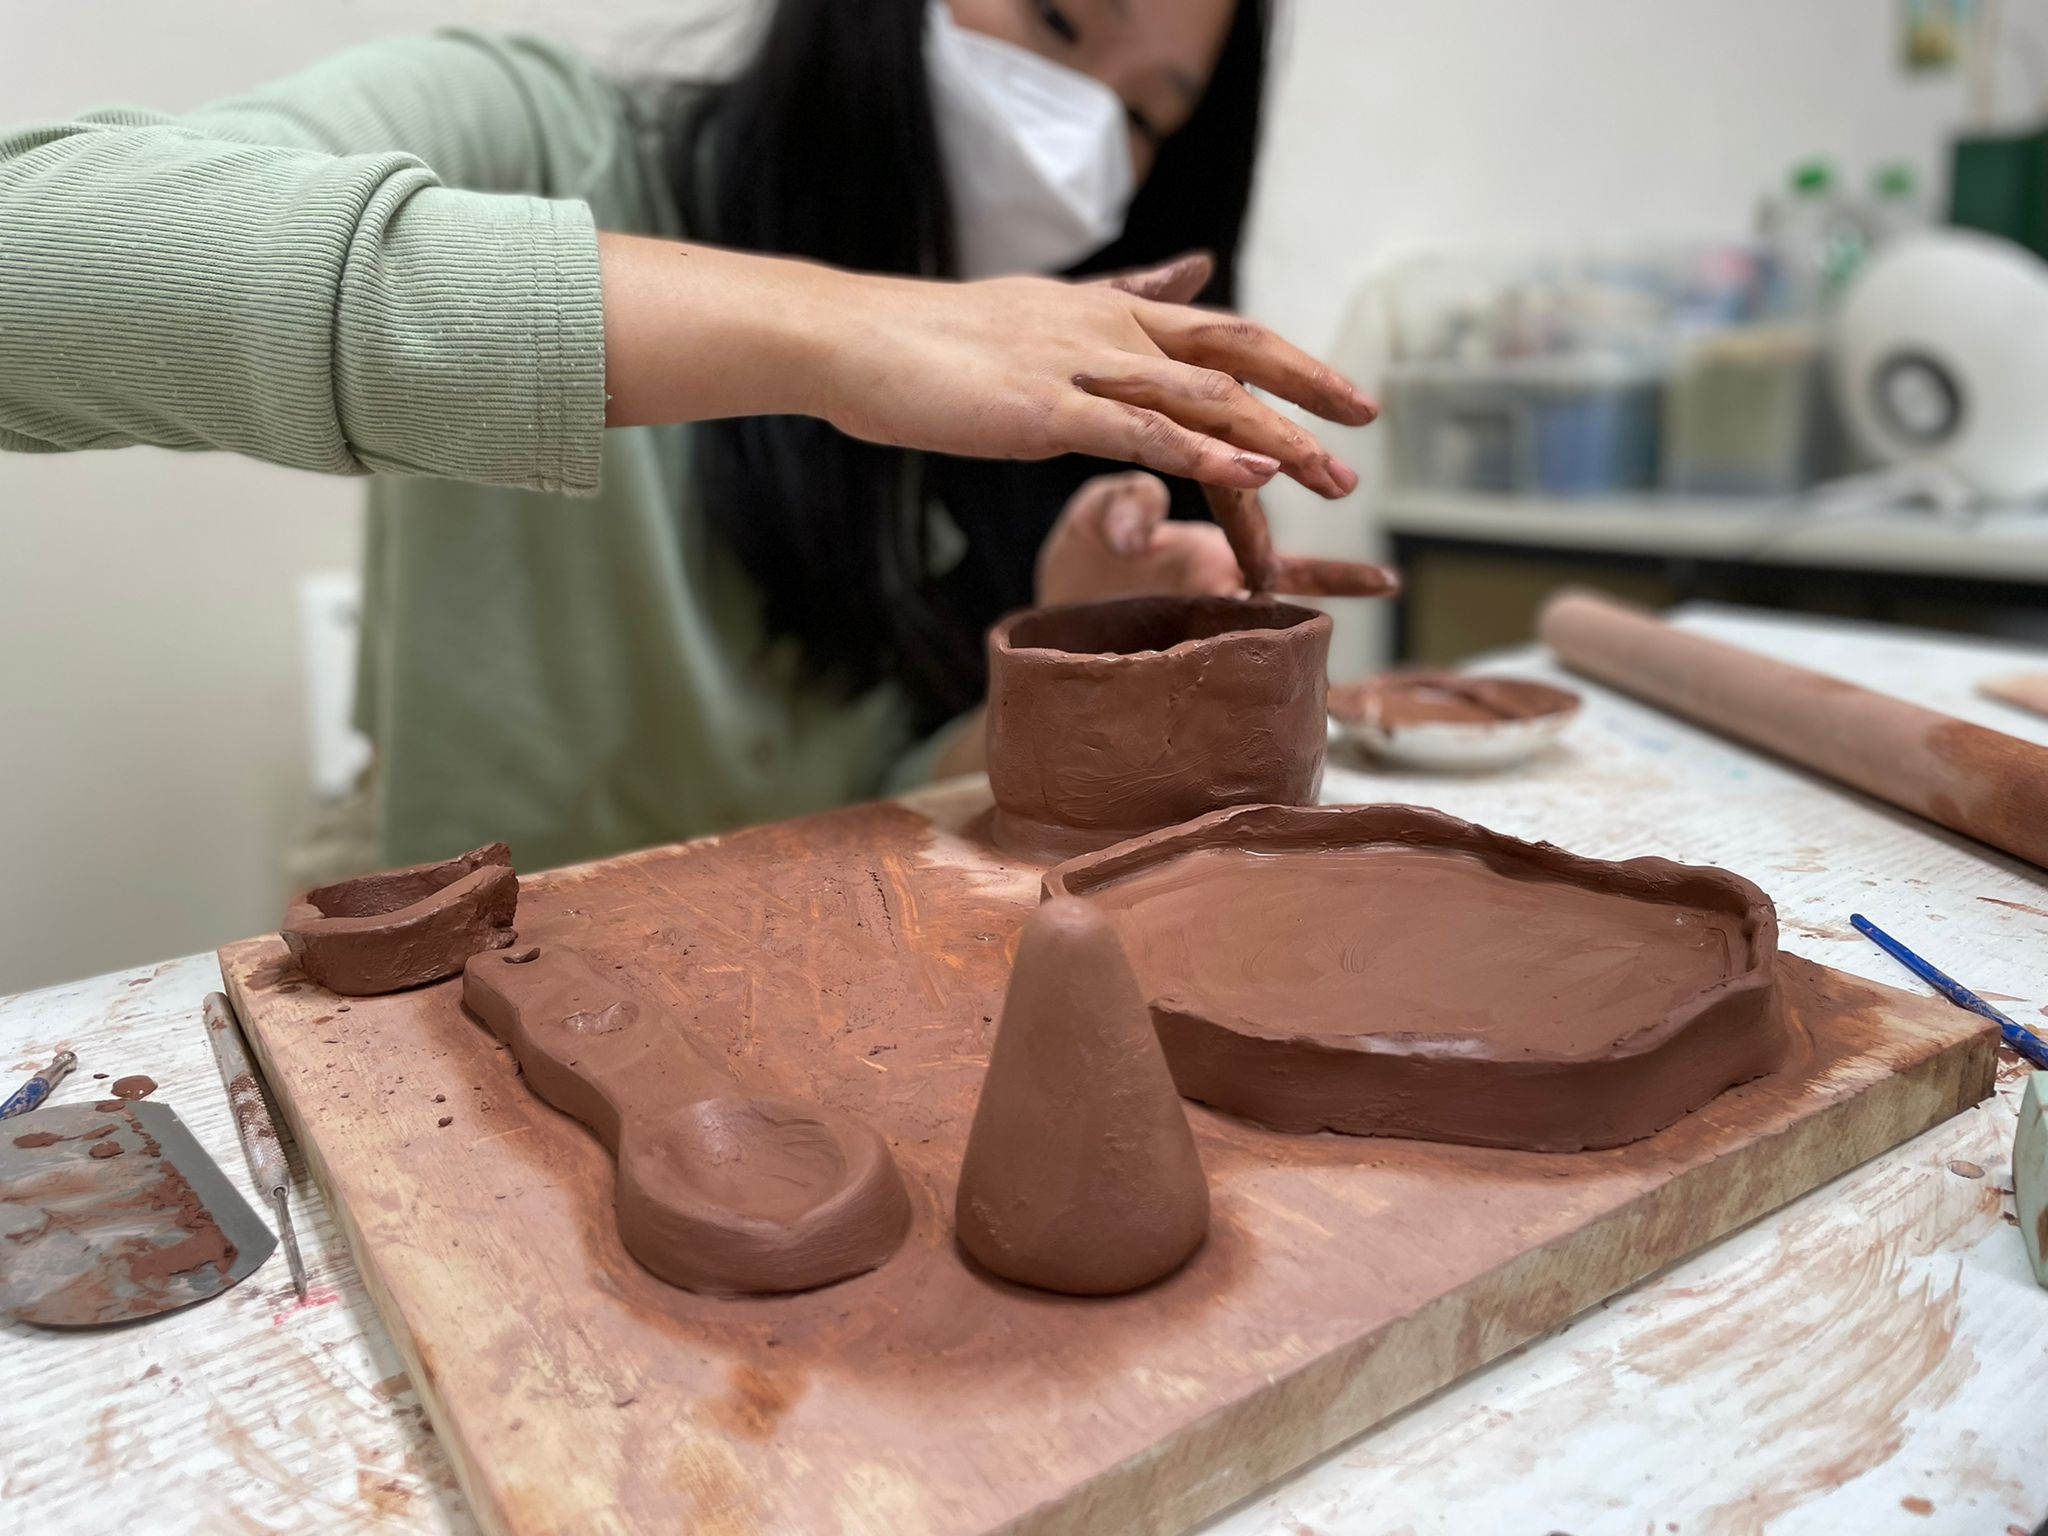 Students are participating in a clay workshop.